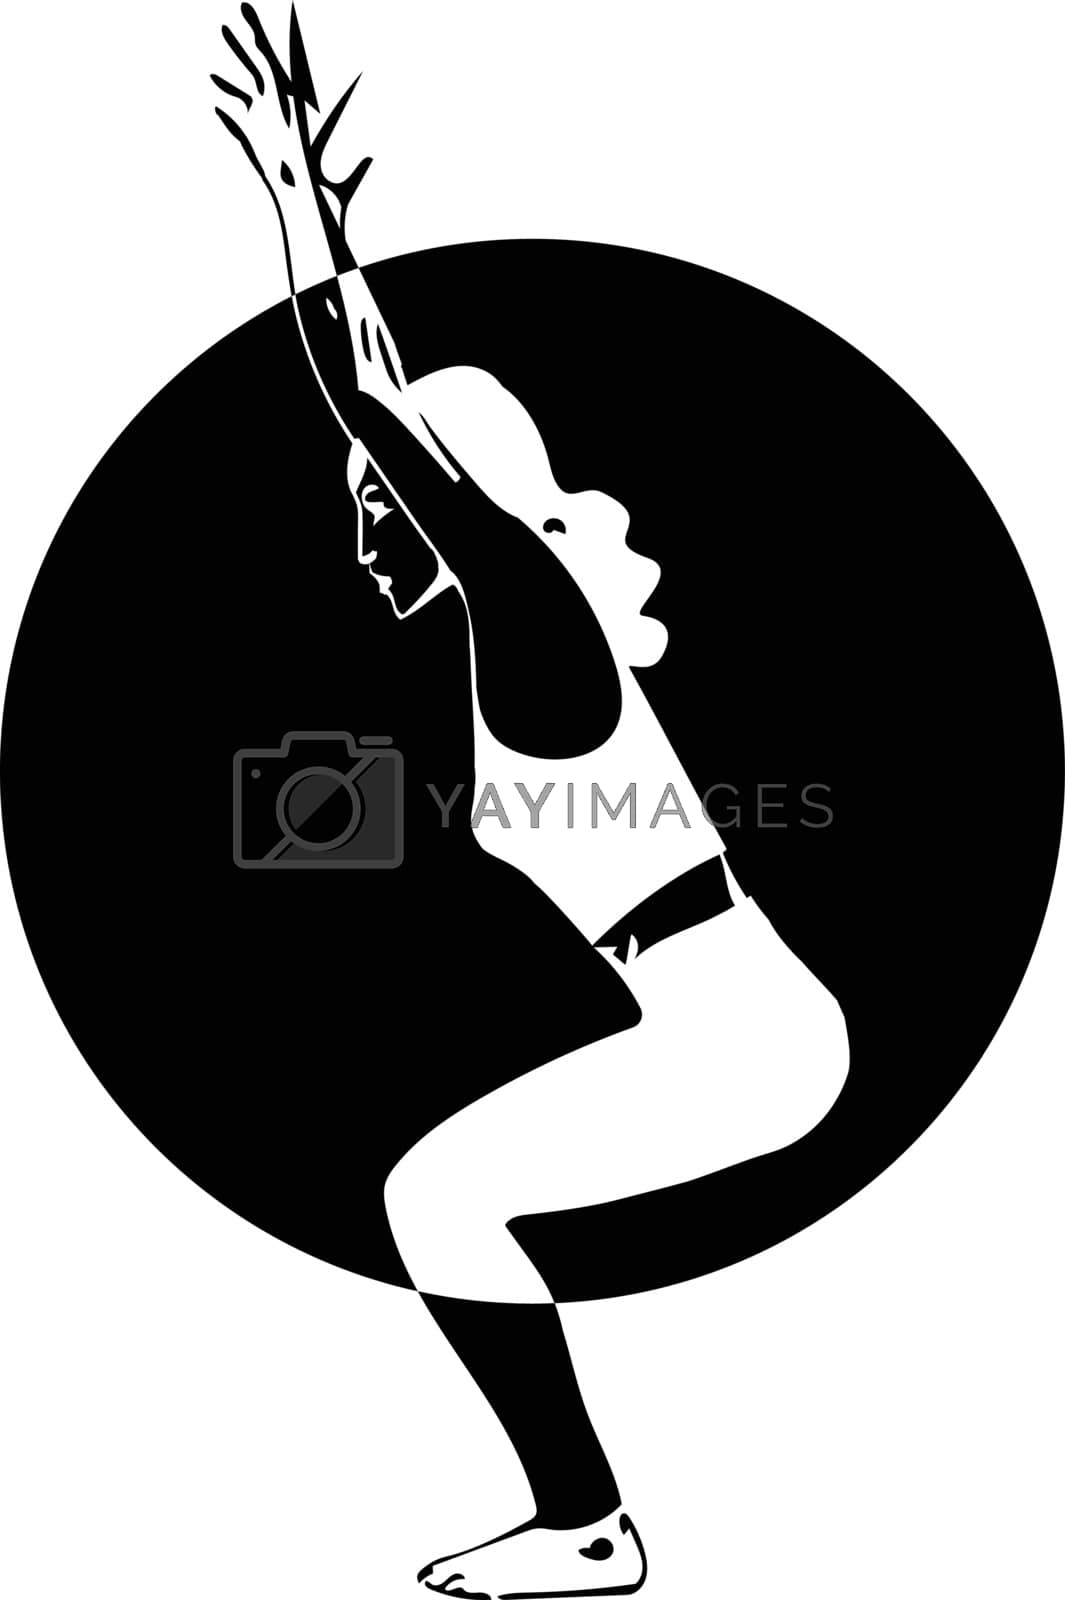 Royalty free image of fit young woman in sportswear by aroas